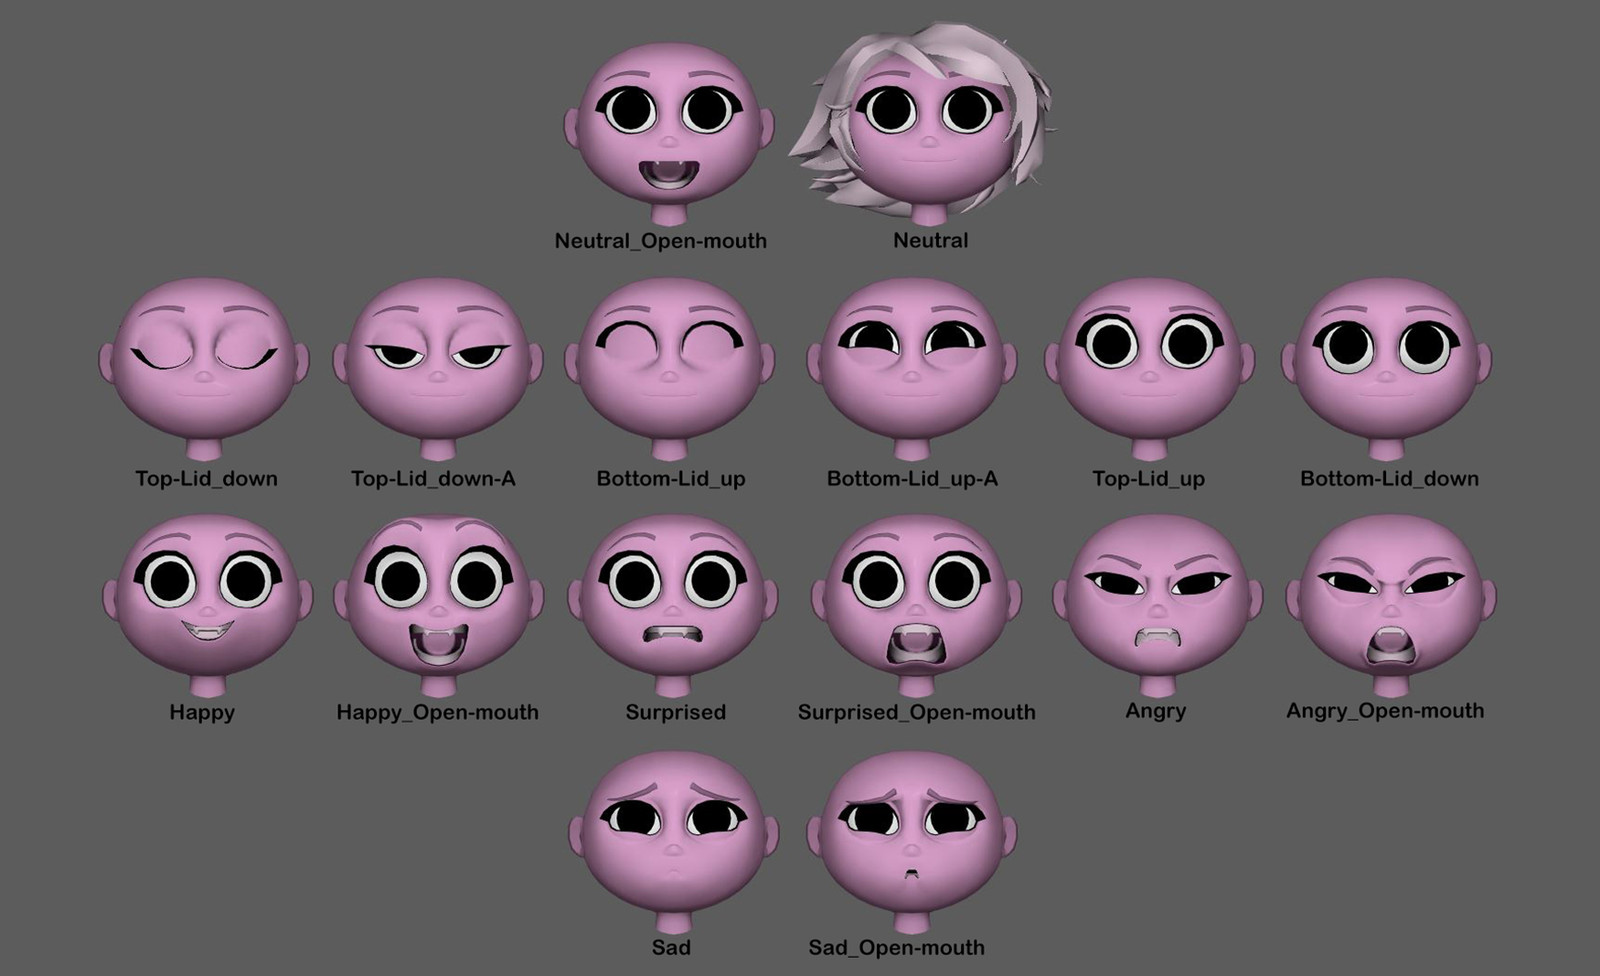 These are the face-shapes I made for the VR Company Mindshow, Inc in 2016.  The heads were already modeled and textured, but I did change some of the topology on a few to have (what I consider) proper topology flow.